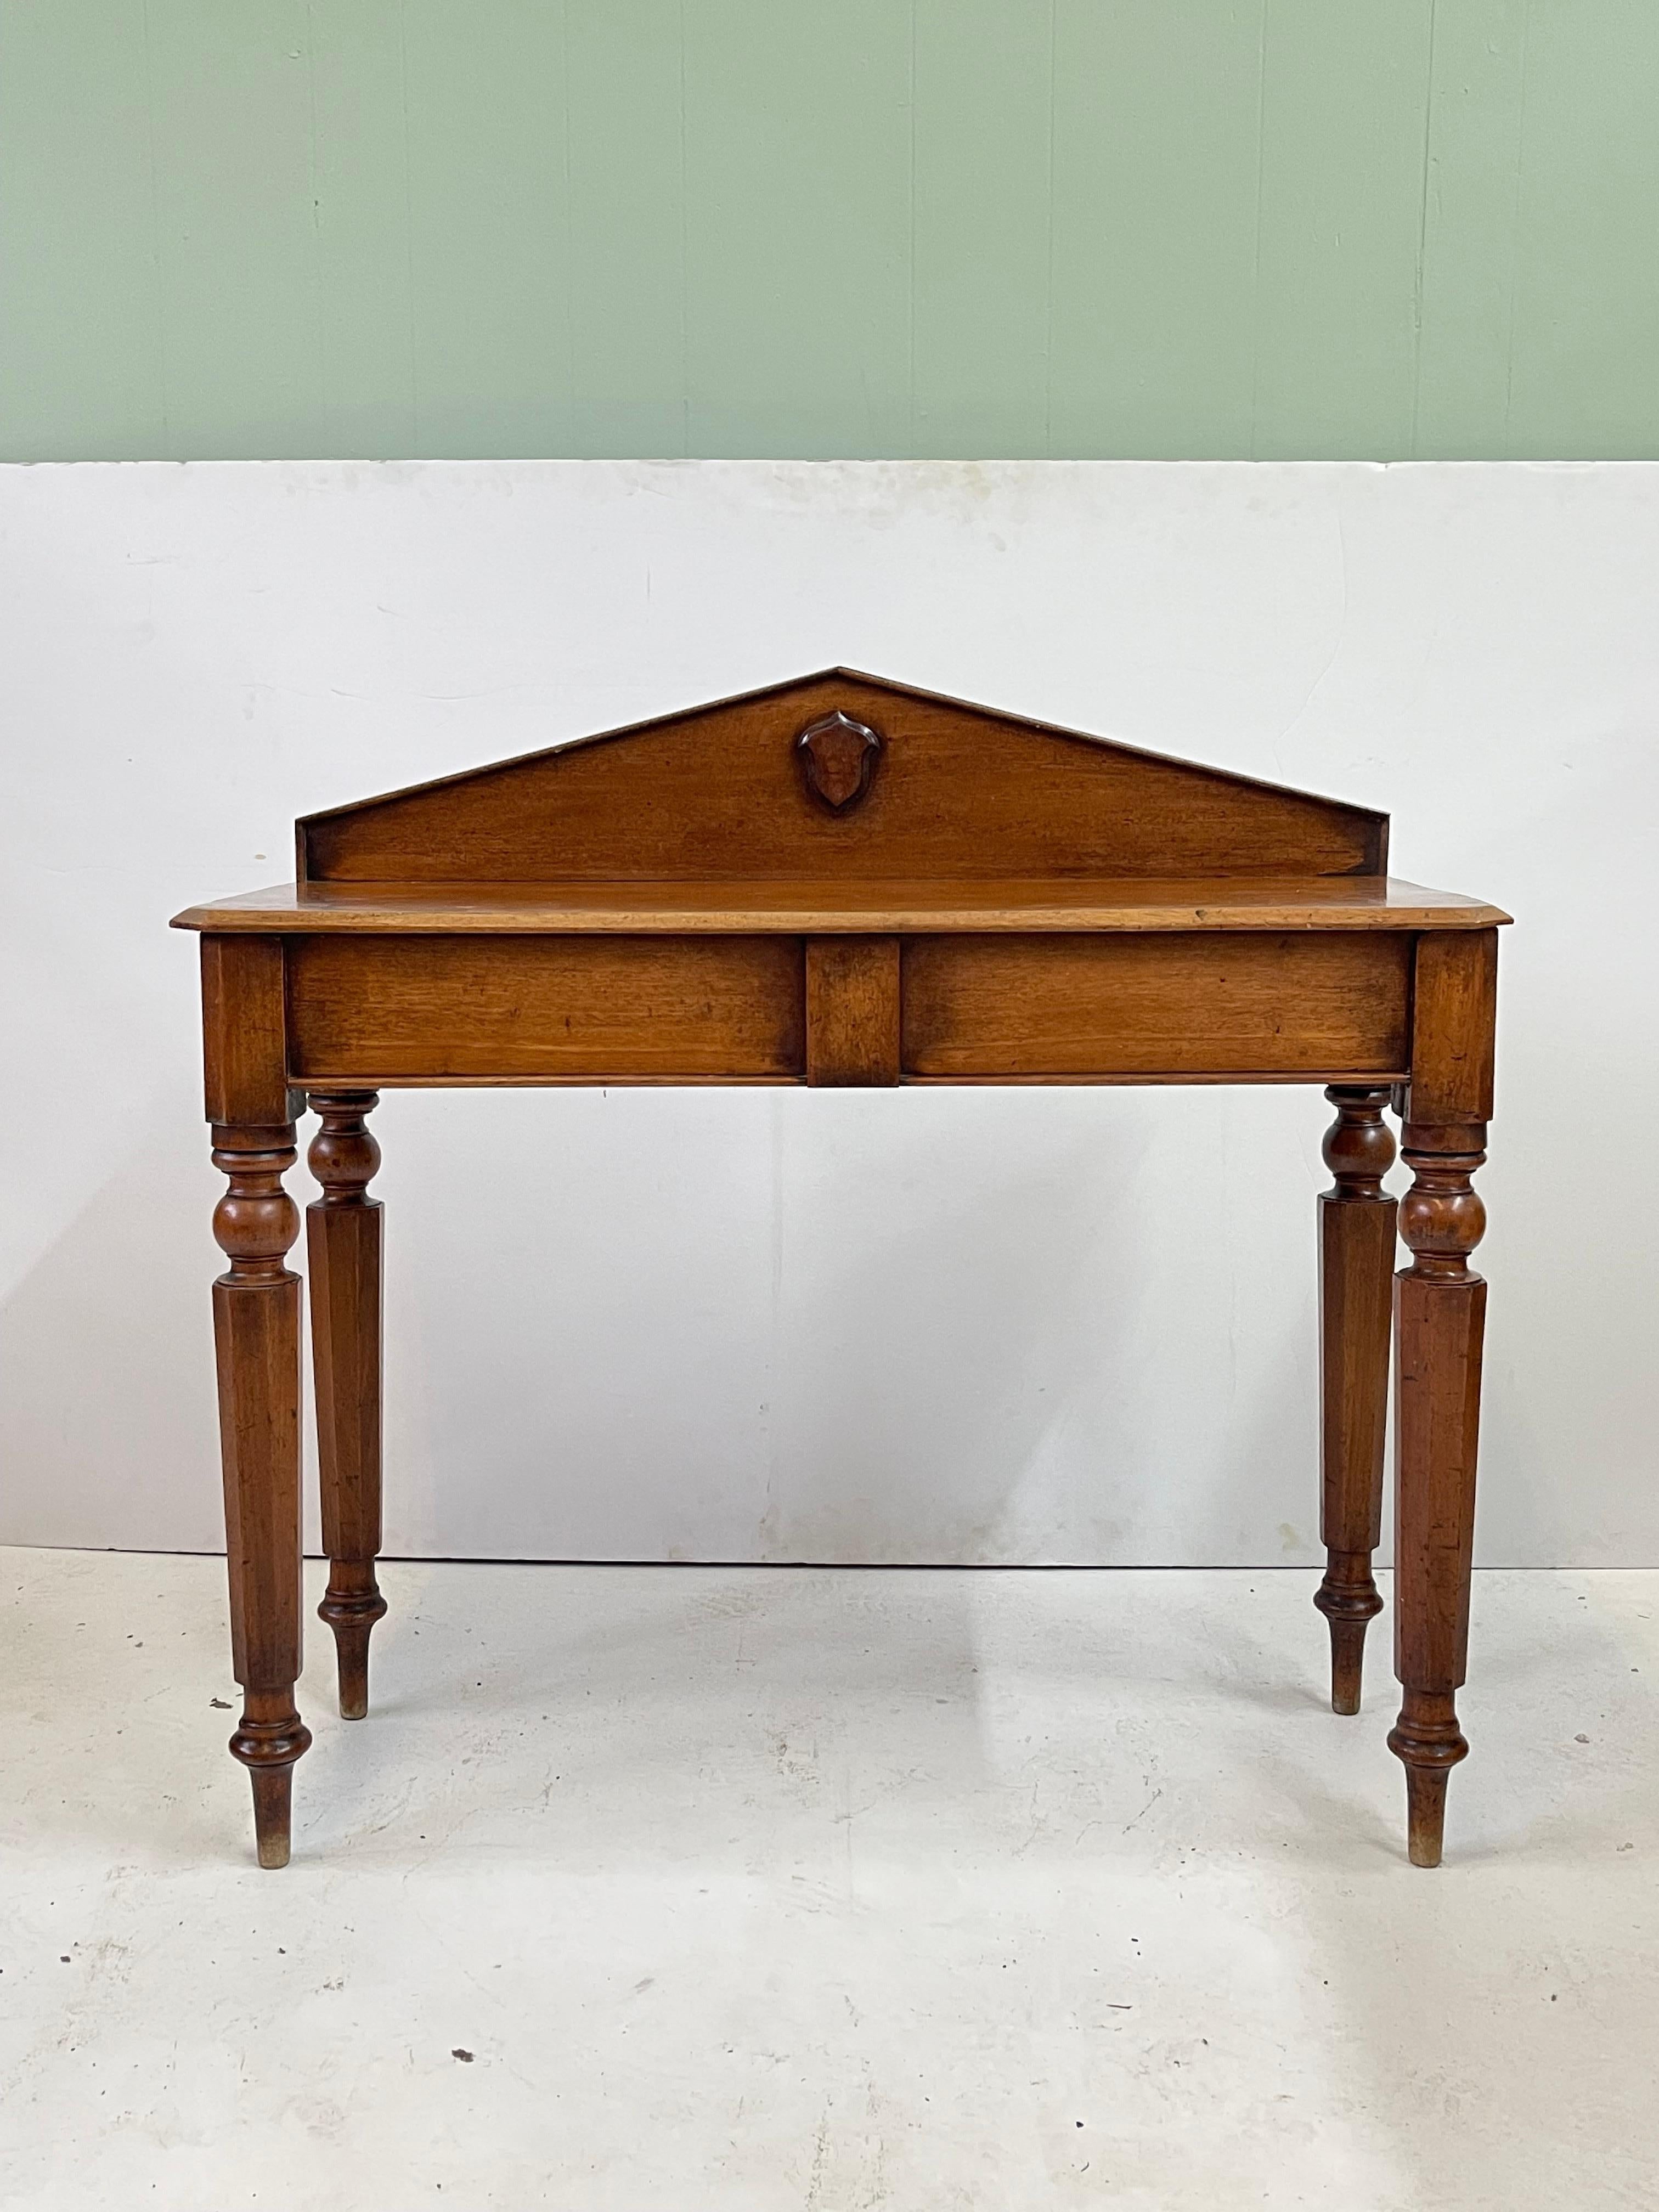 A 19th Century English console table made from oak with a peaked backsplash decorated with a wooden shield. This table features a rectangular top with beveled edges and has a single dovetailed side drawer ingeniously hidden in the apron. The table